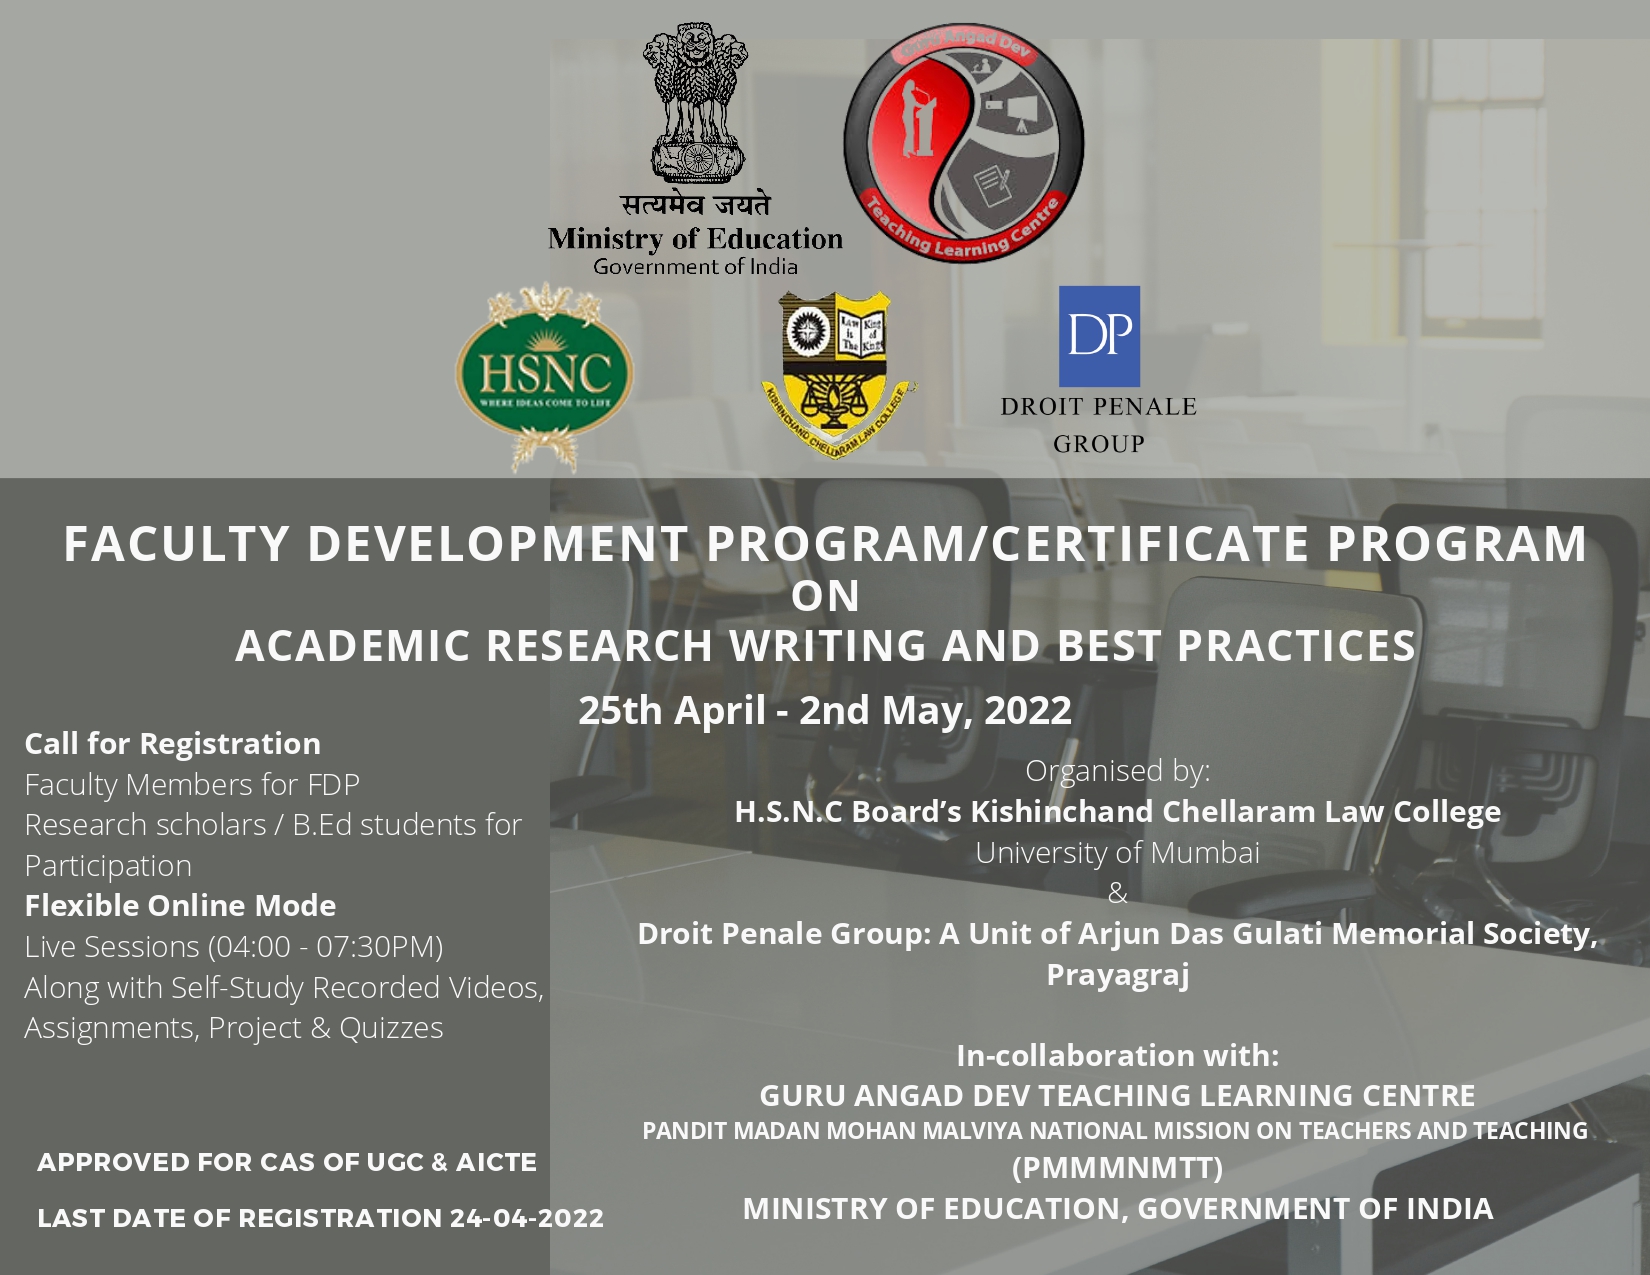 Course Image OFDP-81: ACADEMIC RESEARCH WRITING AND BEST PRACTICES